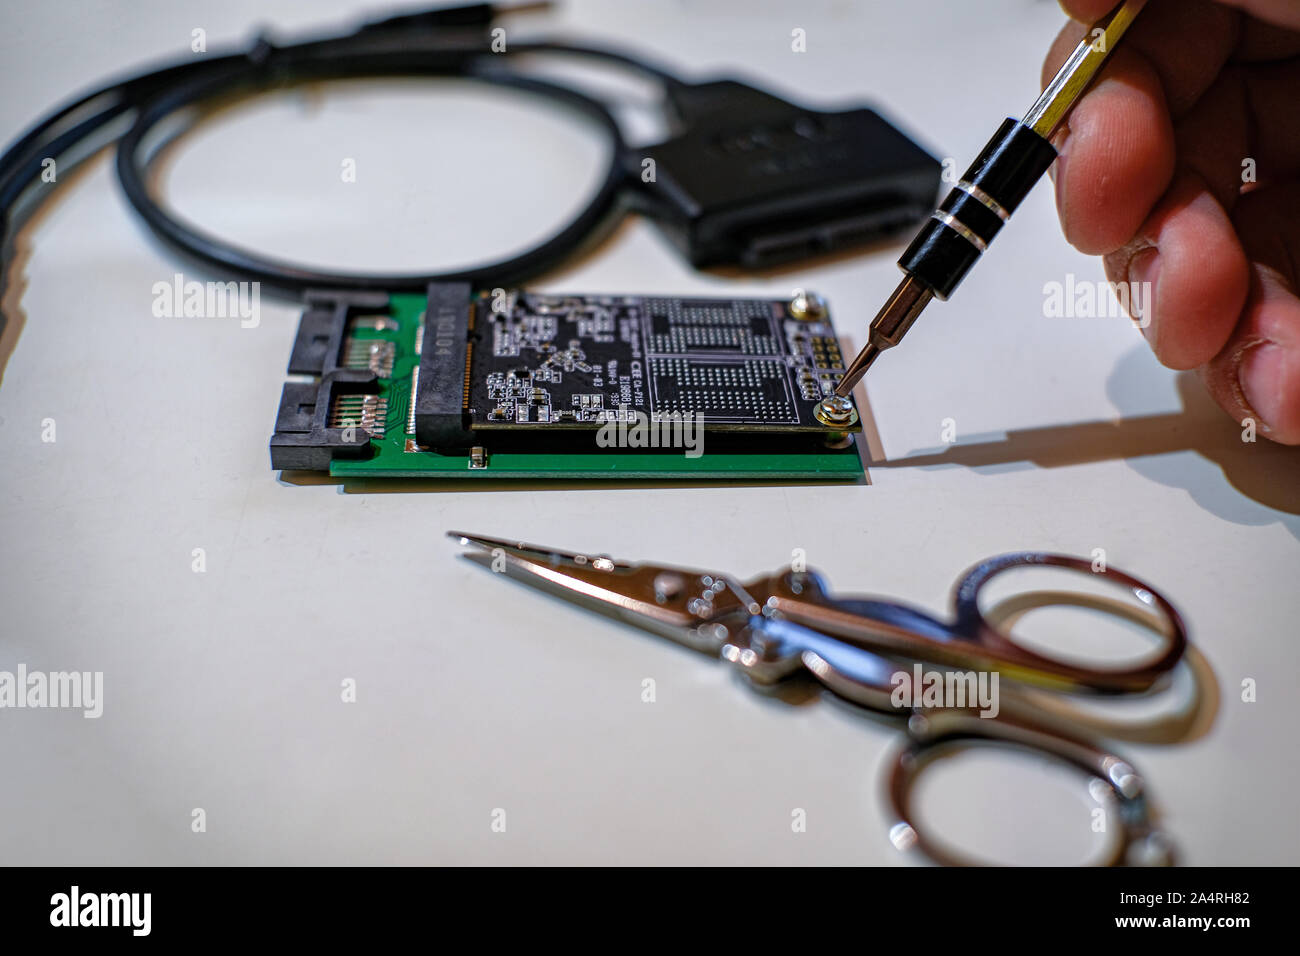 Human hands working on ssd chipset computer components with screwdriver Stock Photo